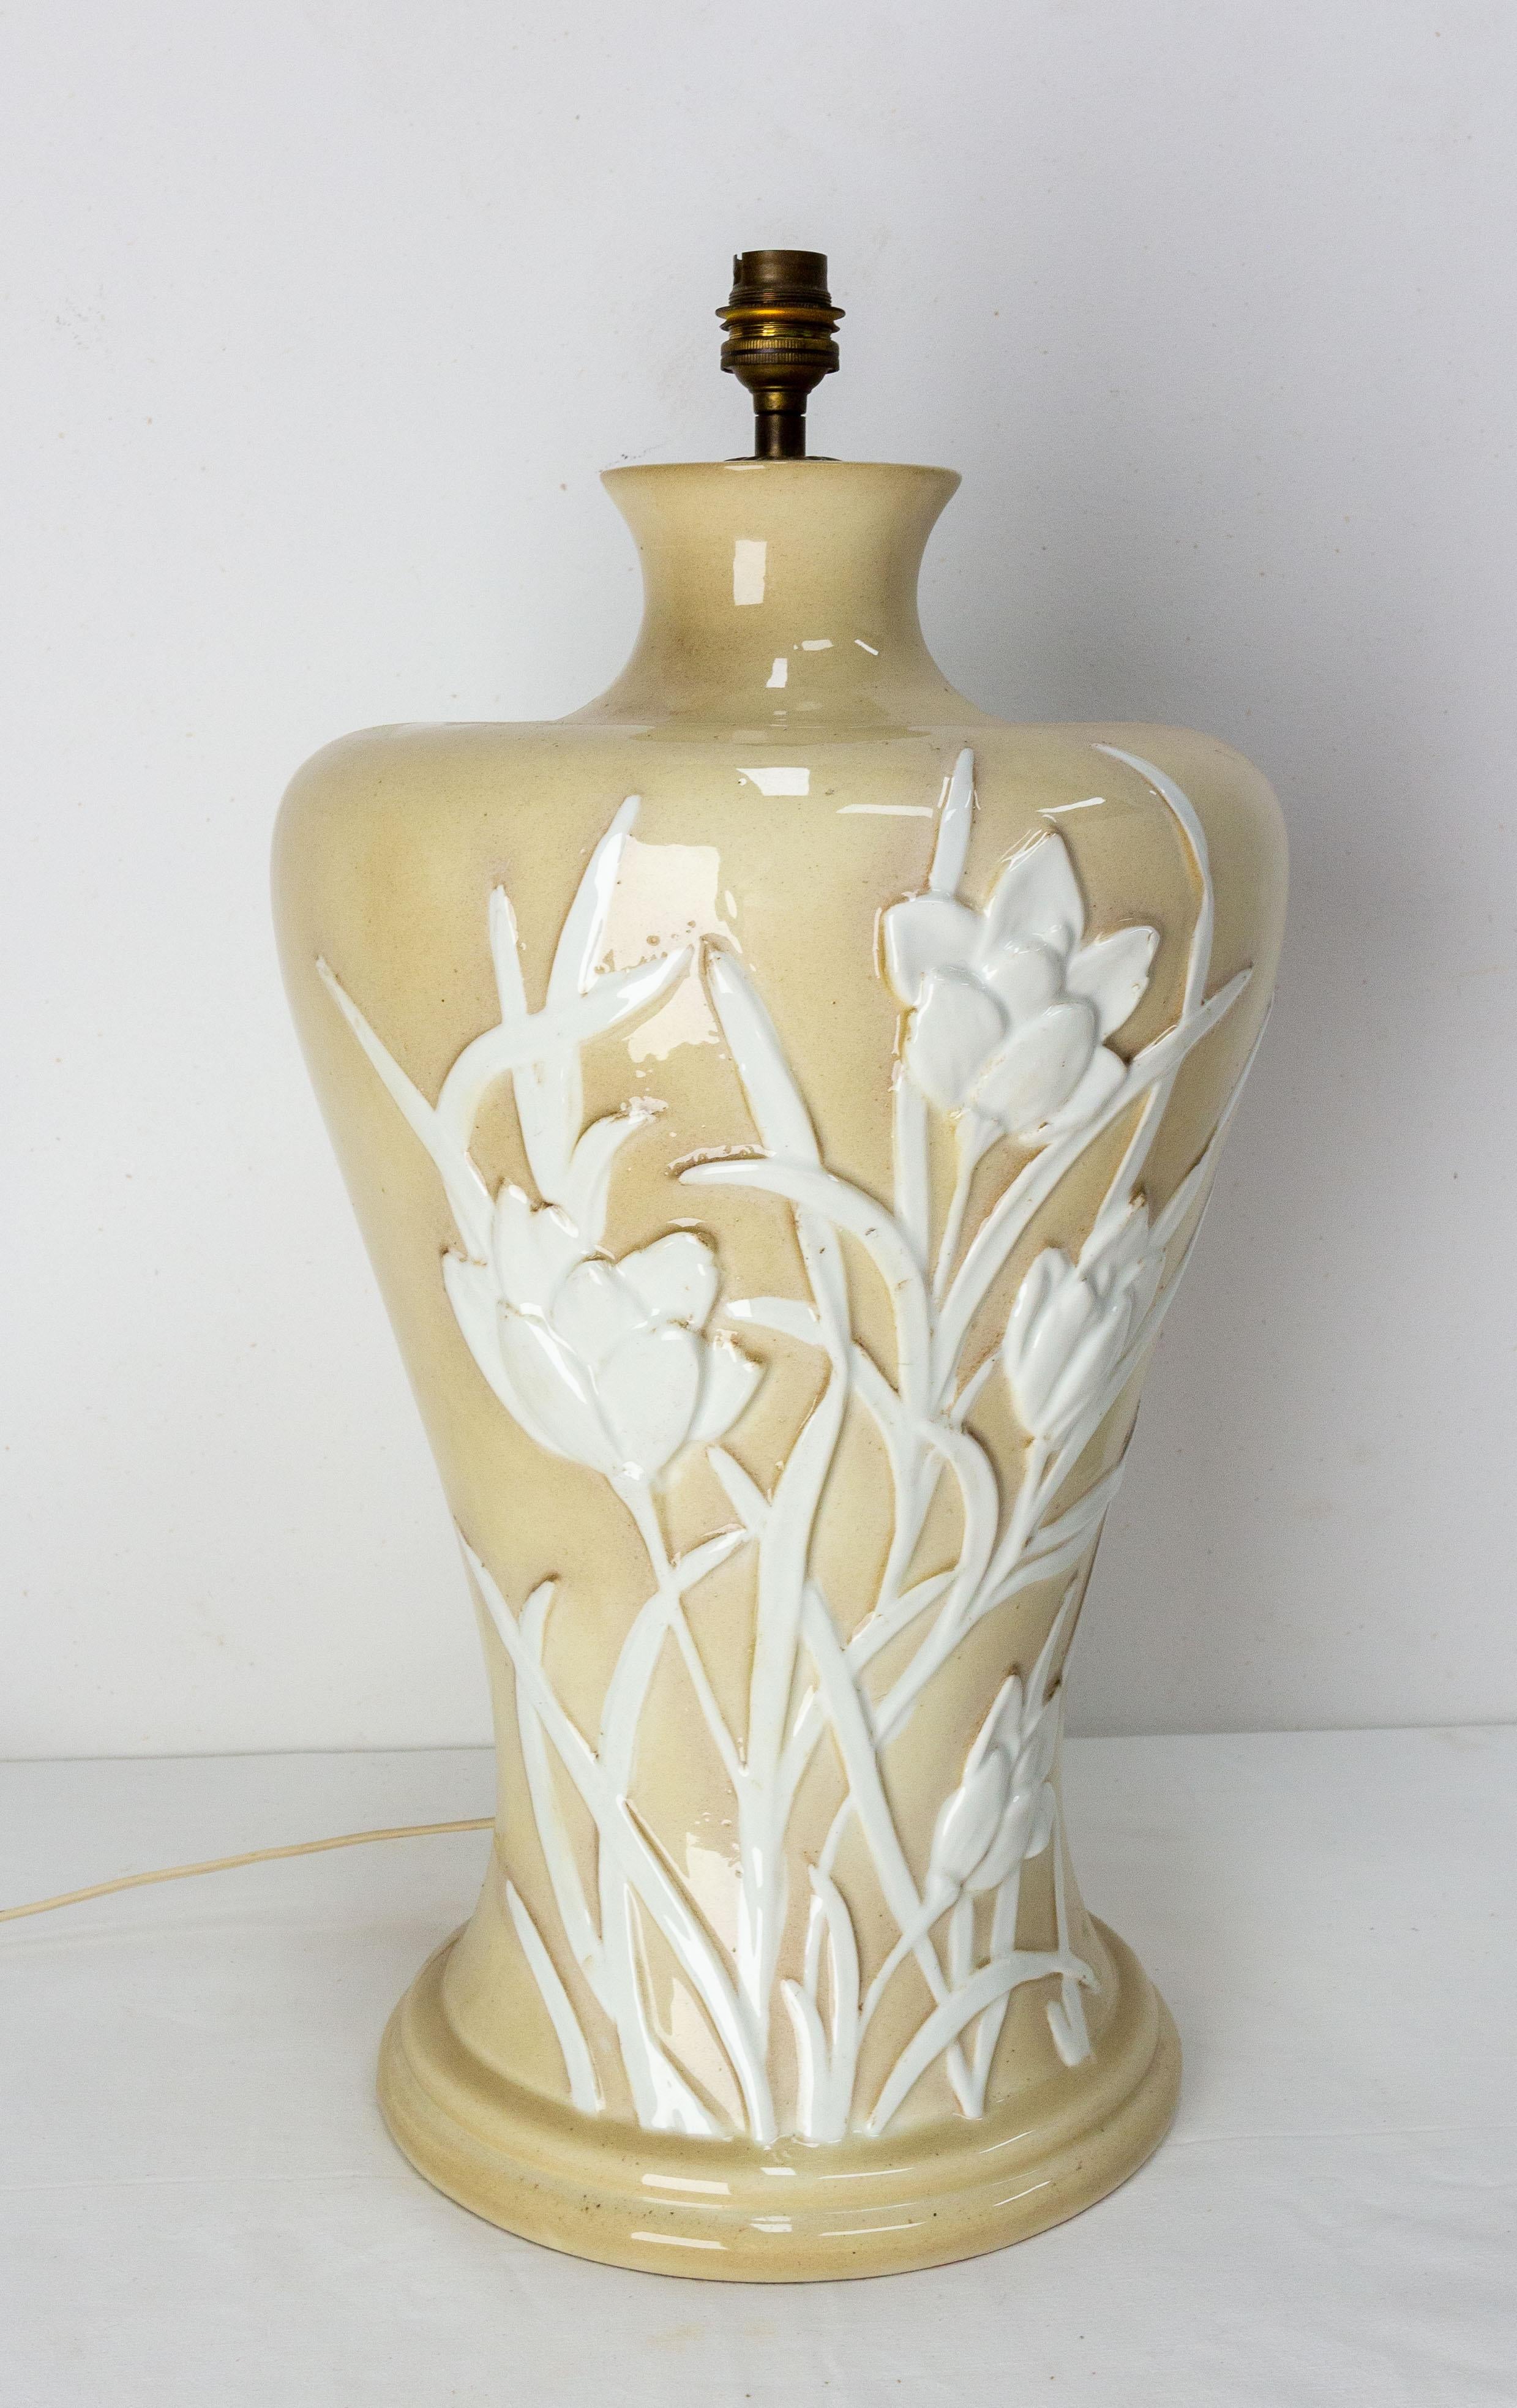 Ceramic table lamp representing vegetation and flowers.
Elegant lamp for a dining room a living room or an entrance, perfect to create a subdued atmosphere.
French circa 1960.
Good vintage condition.
Height dimension measured with the bulb